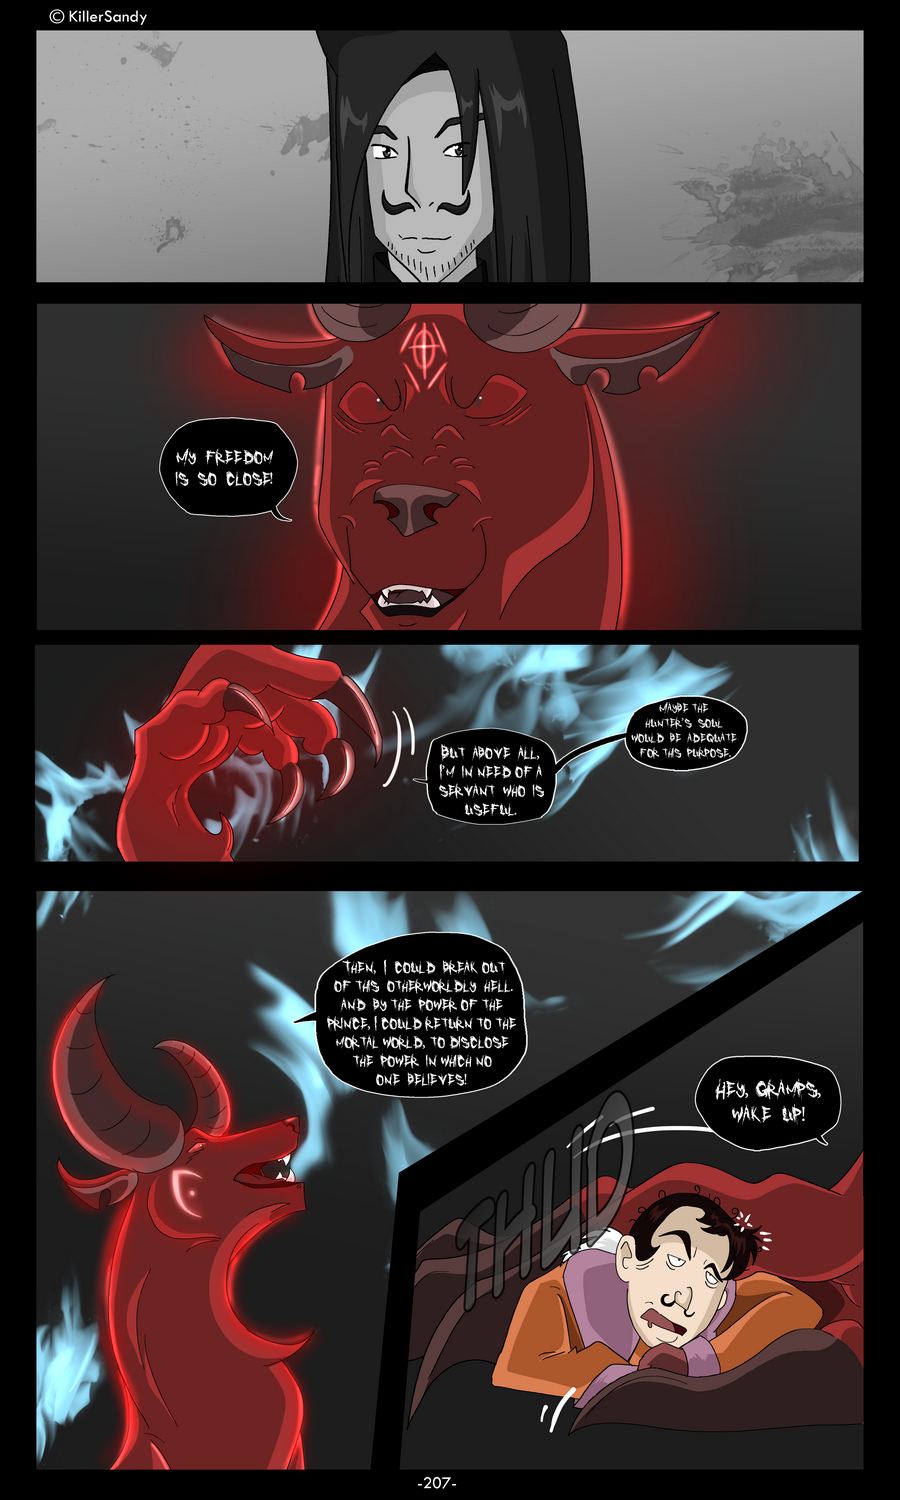 The Prince of the Moonlight Stone page 207